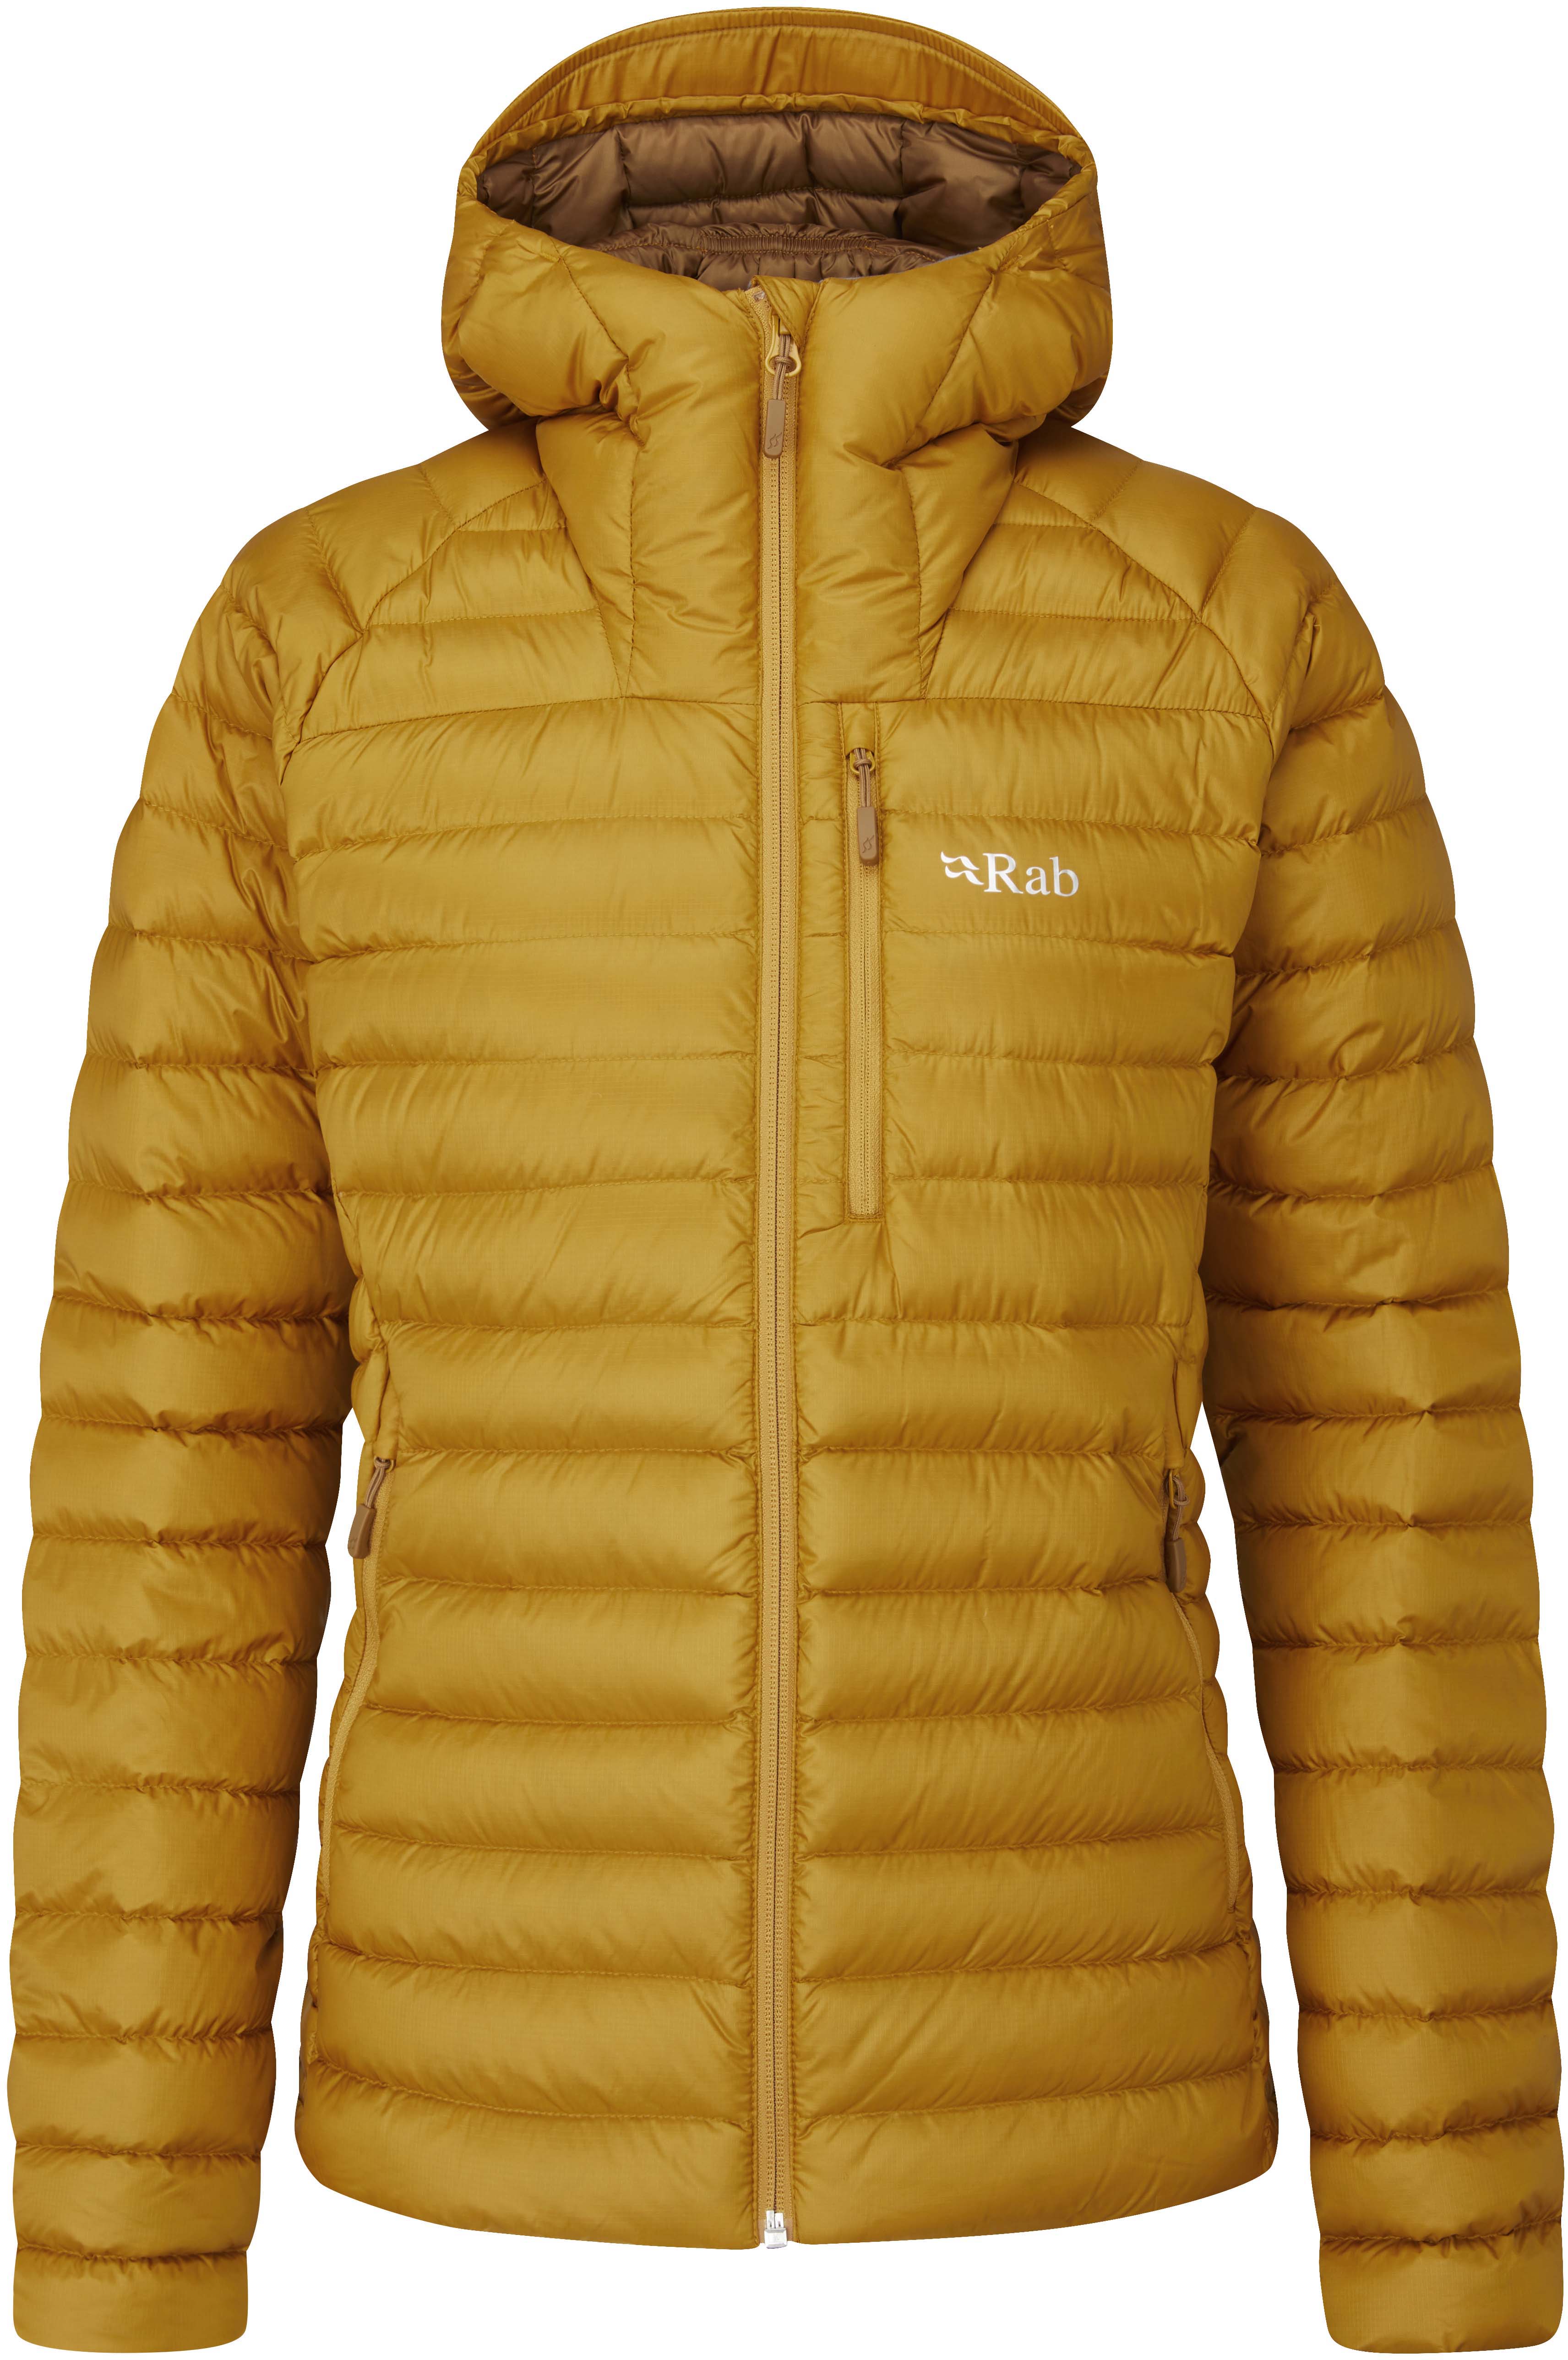 vervangen ondergronds tempo Rab Microlight Alpine Jacket - Women's , Up to 53% Off with Free S&H —  CampSaver